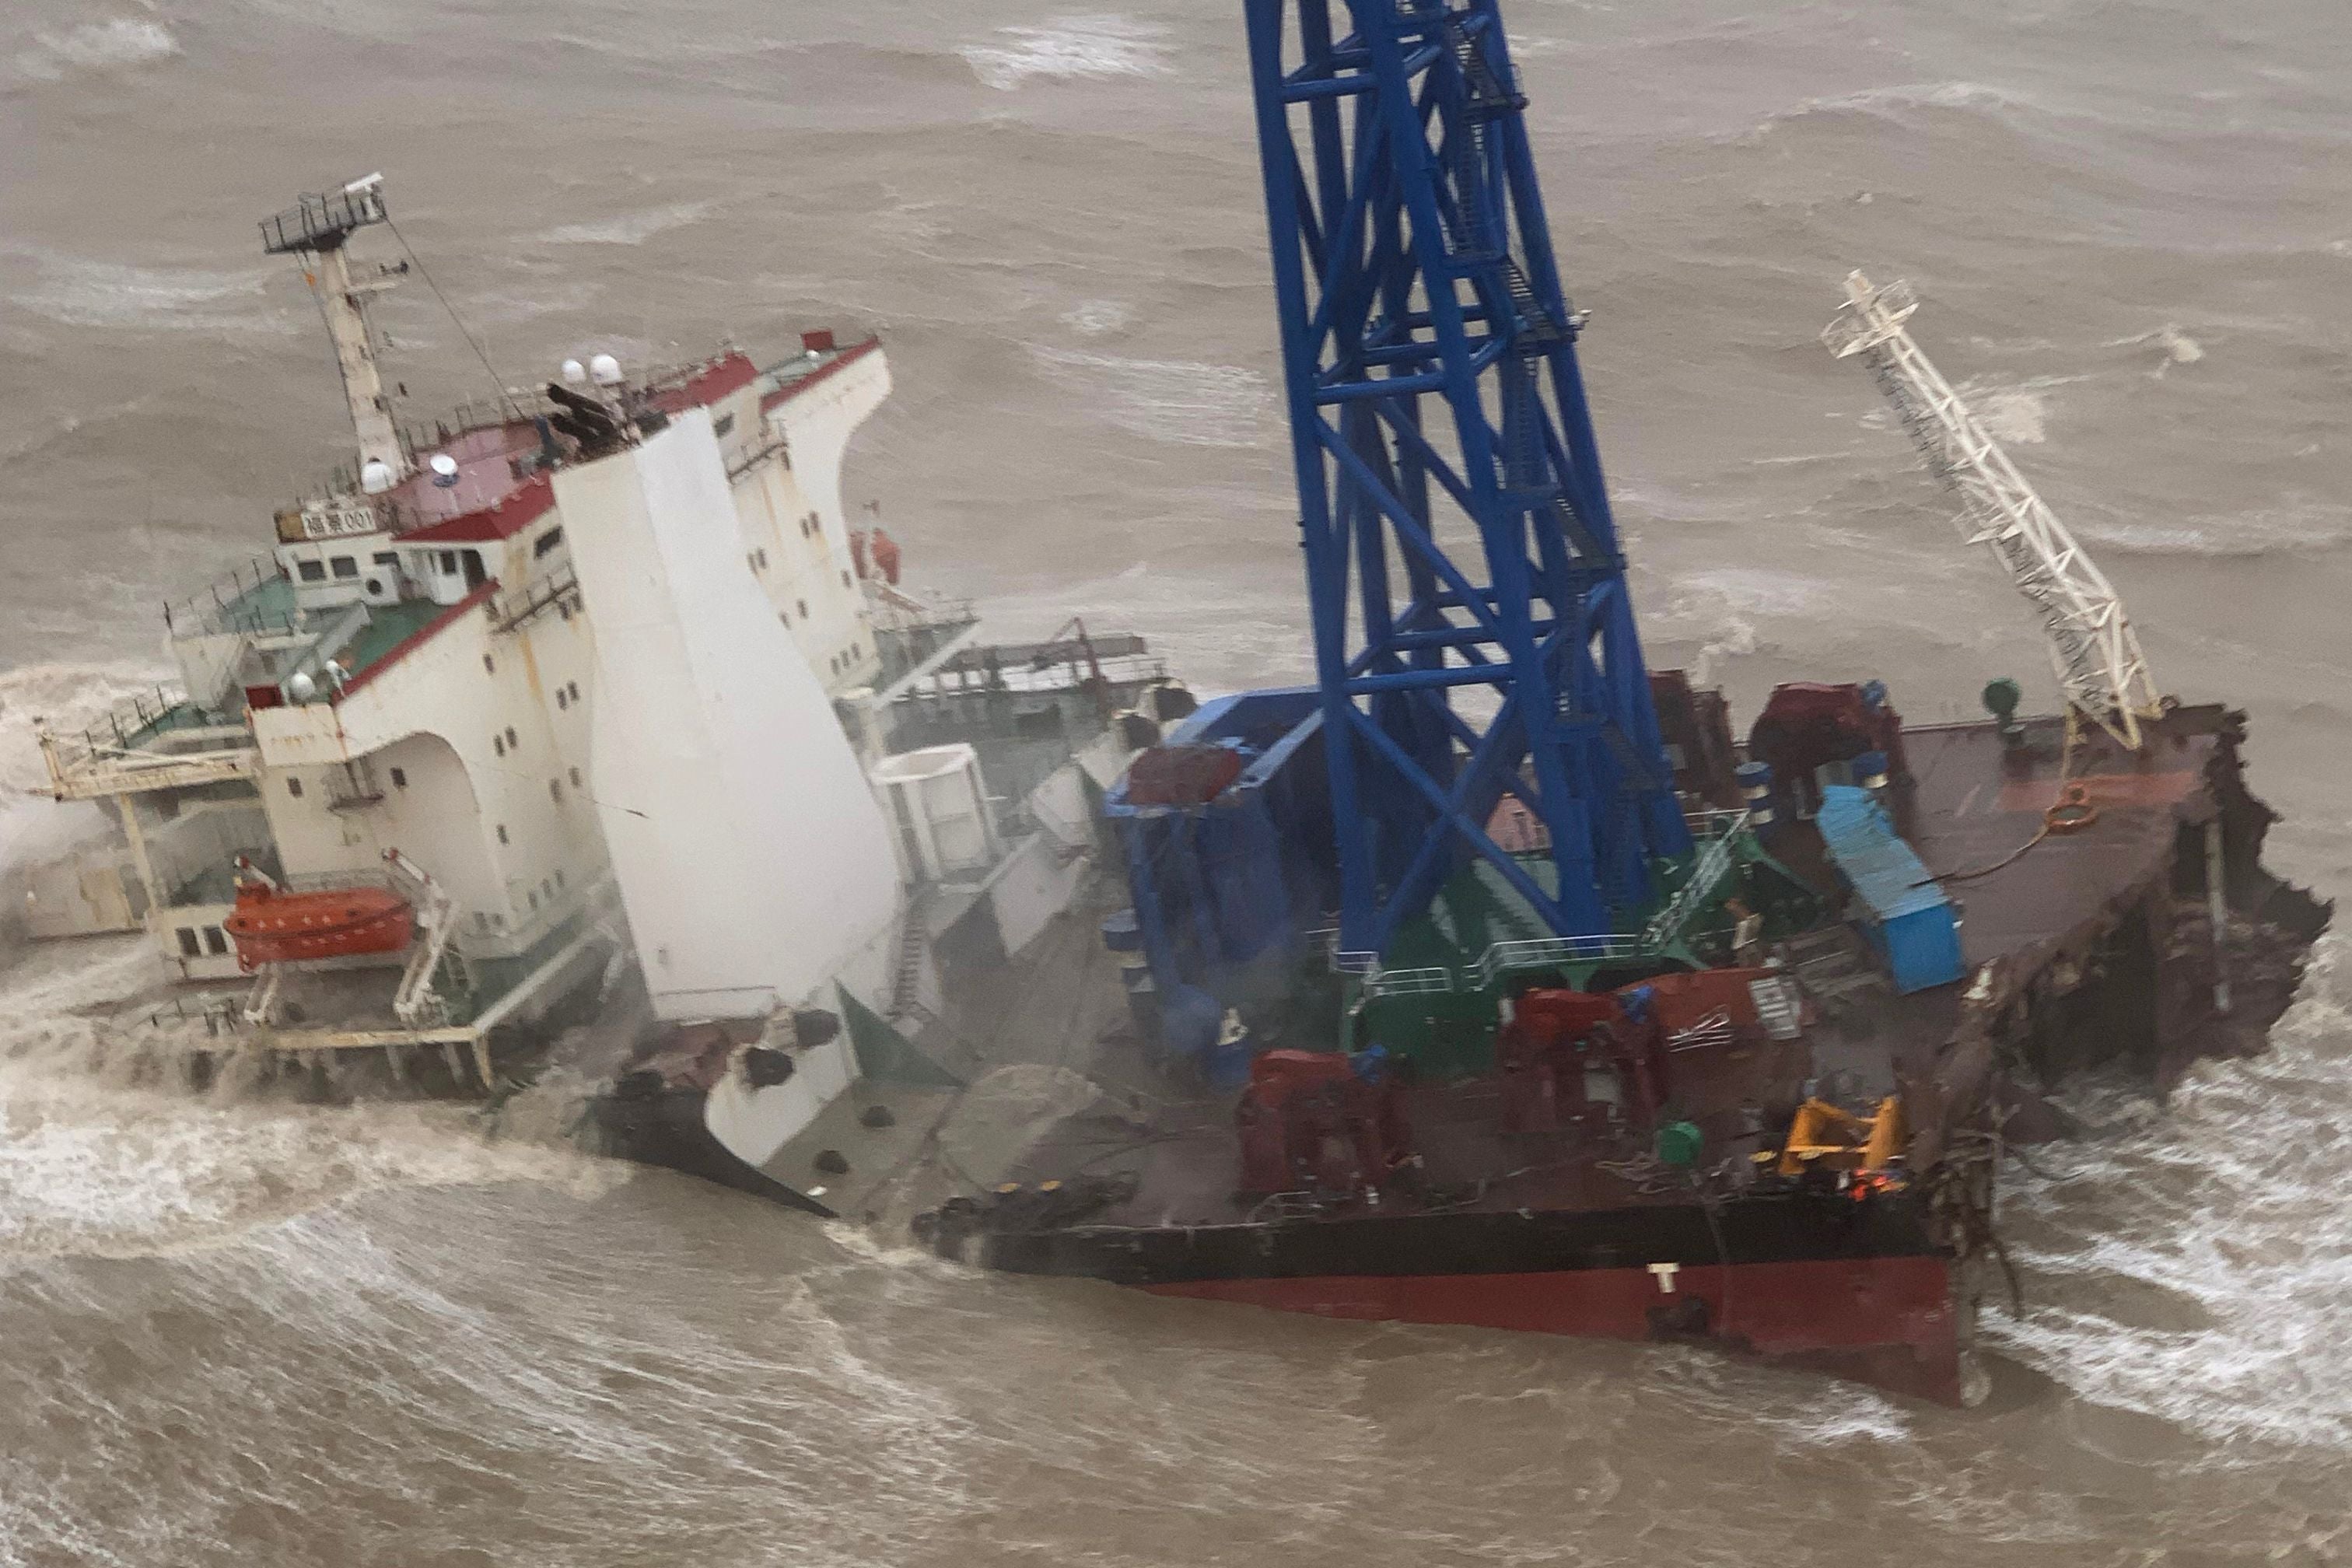 Just three of the 30 workers onboard have been rescused to far